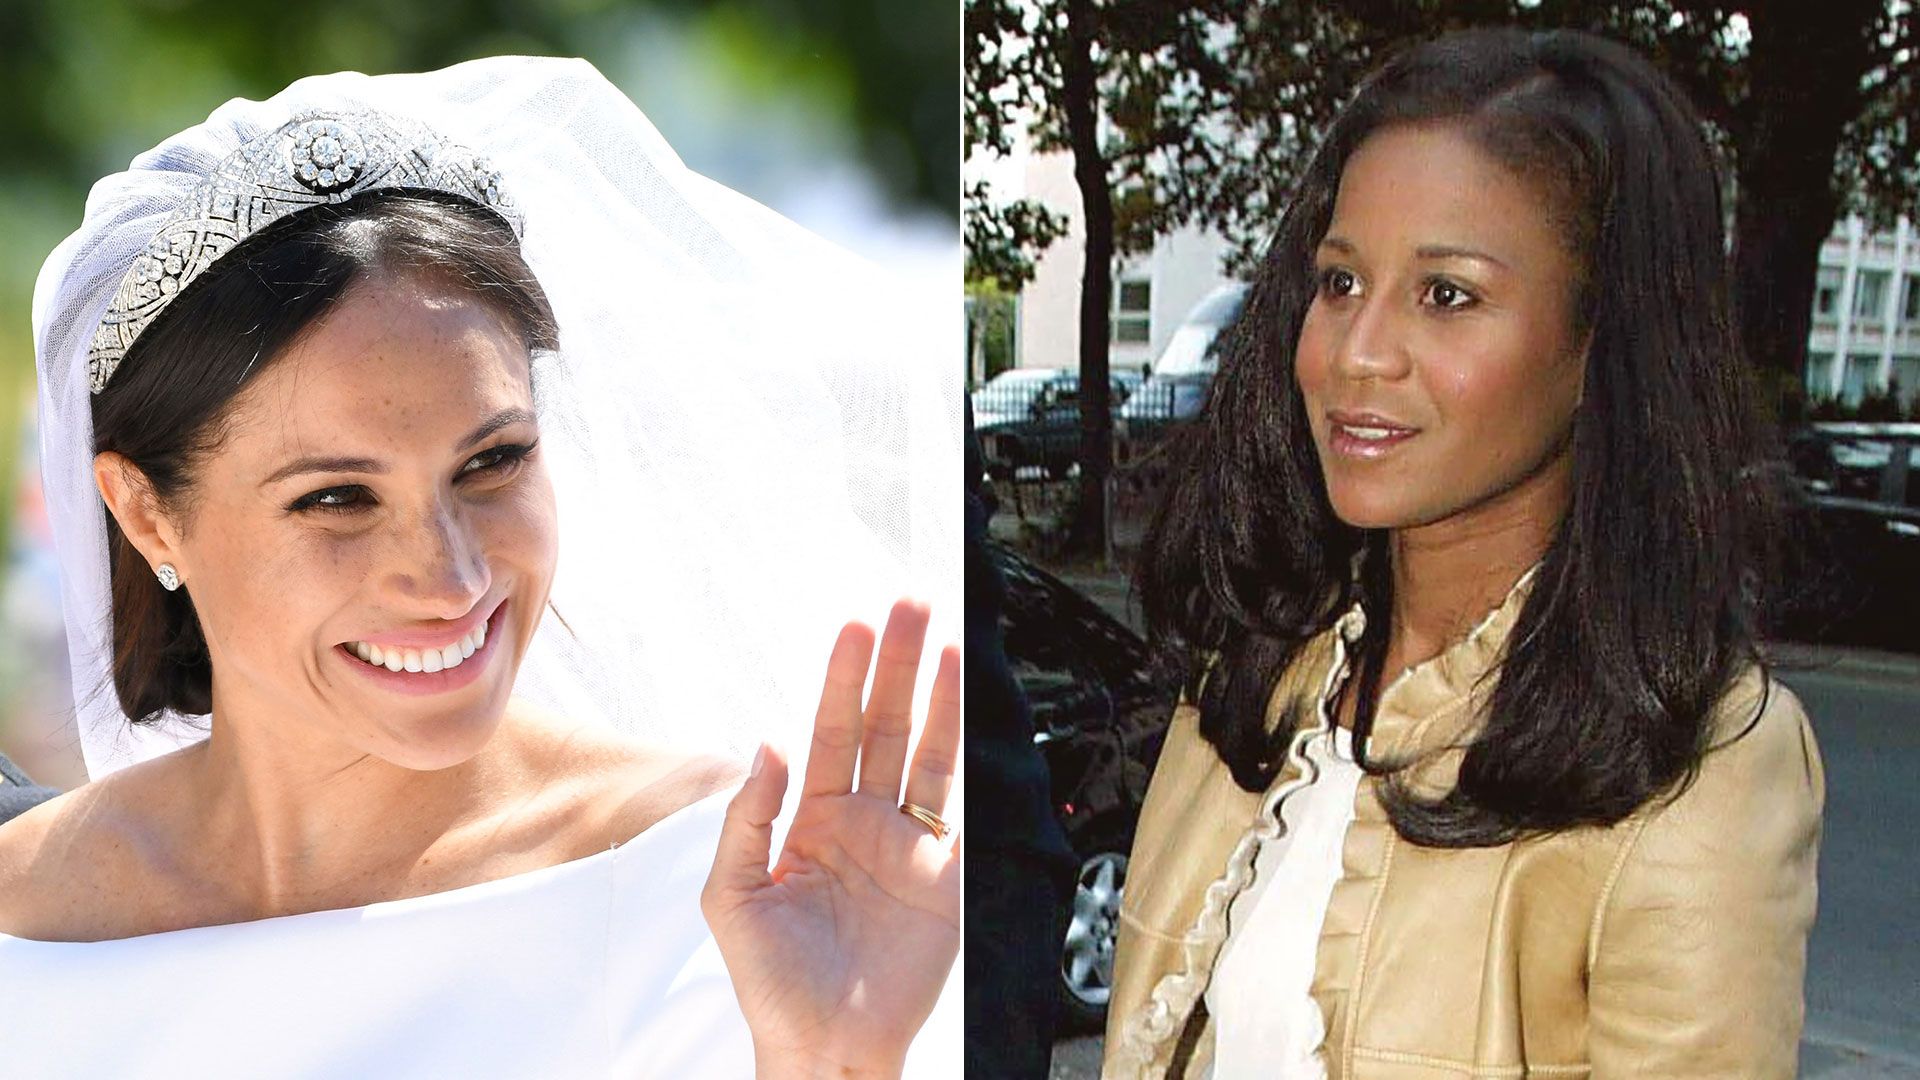 Was Meghan Markle's breathtaking fitted wedding dress inspired by fellow royal?